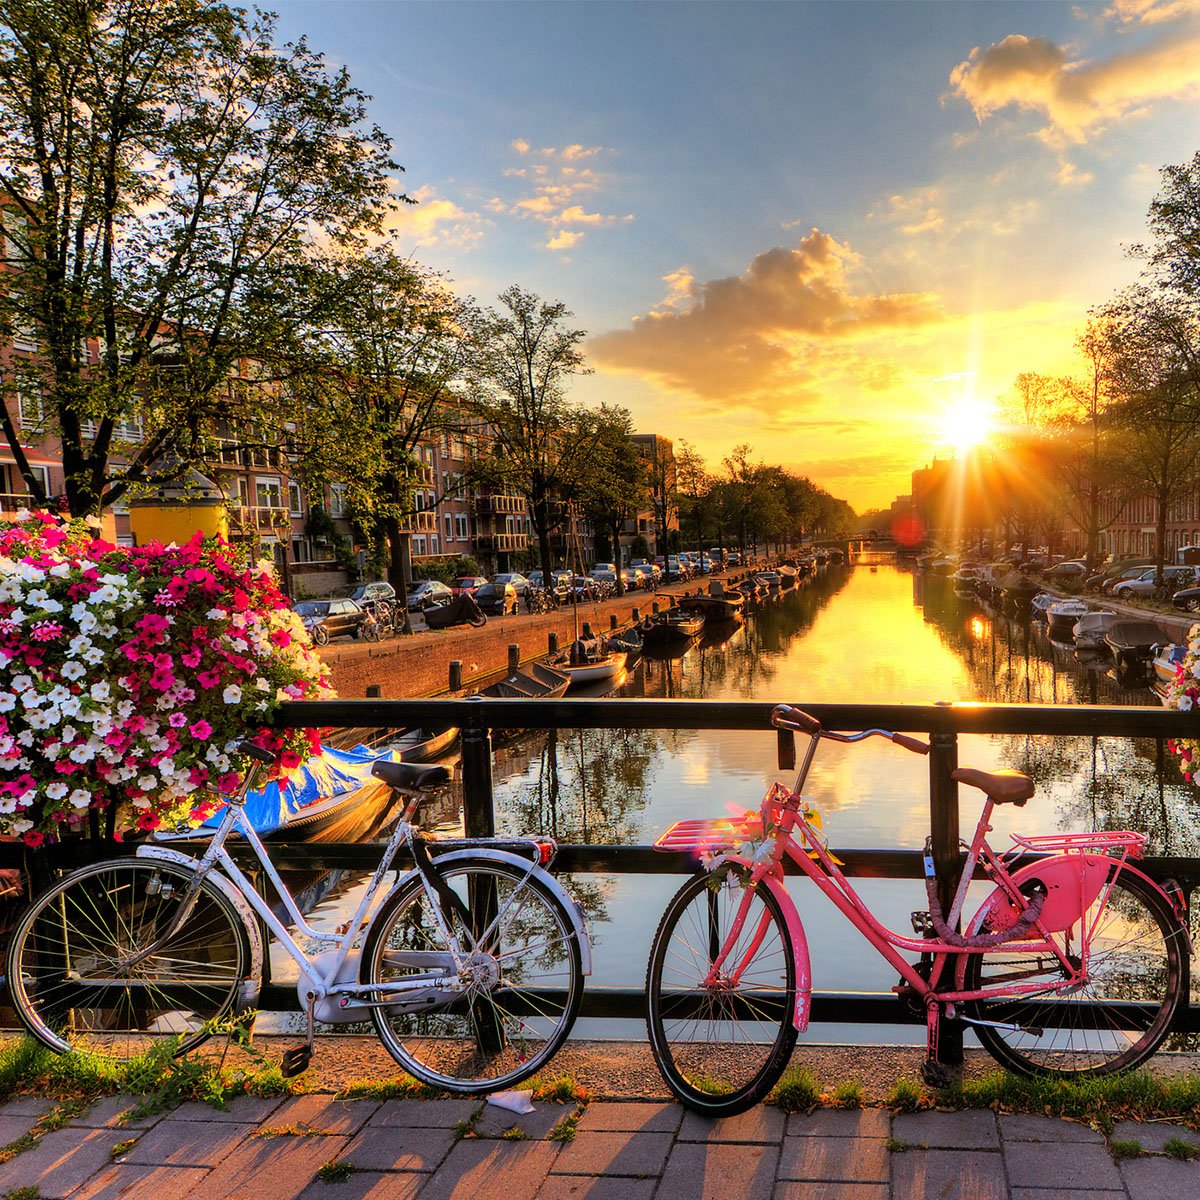 Looking for the perfect city break? Try Amsterdam with KLM! Book now: